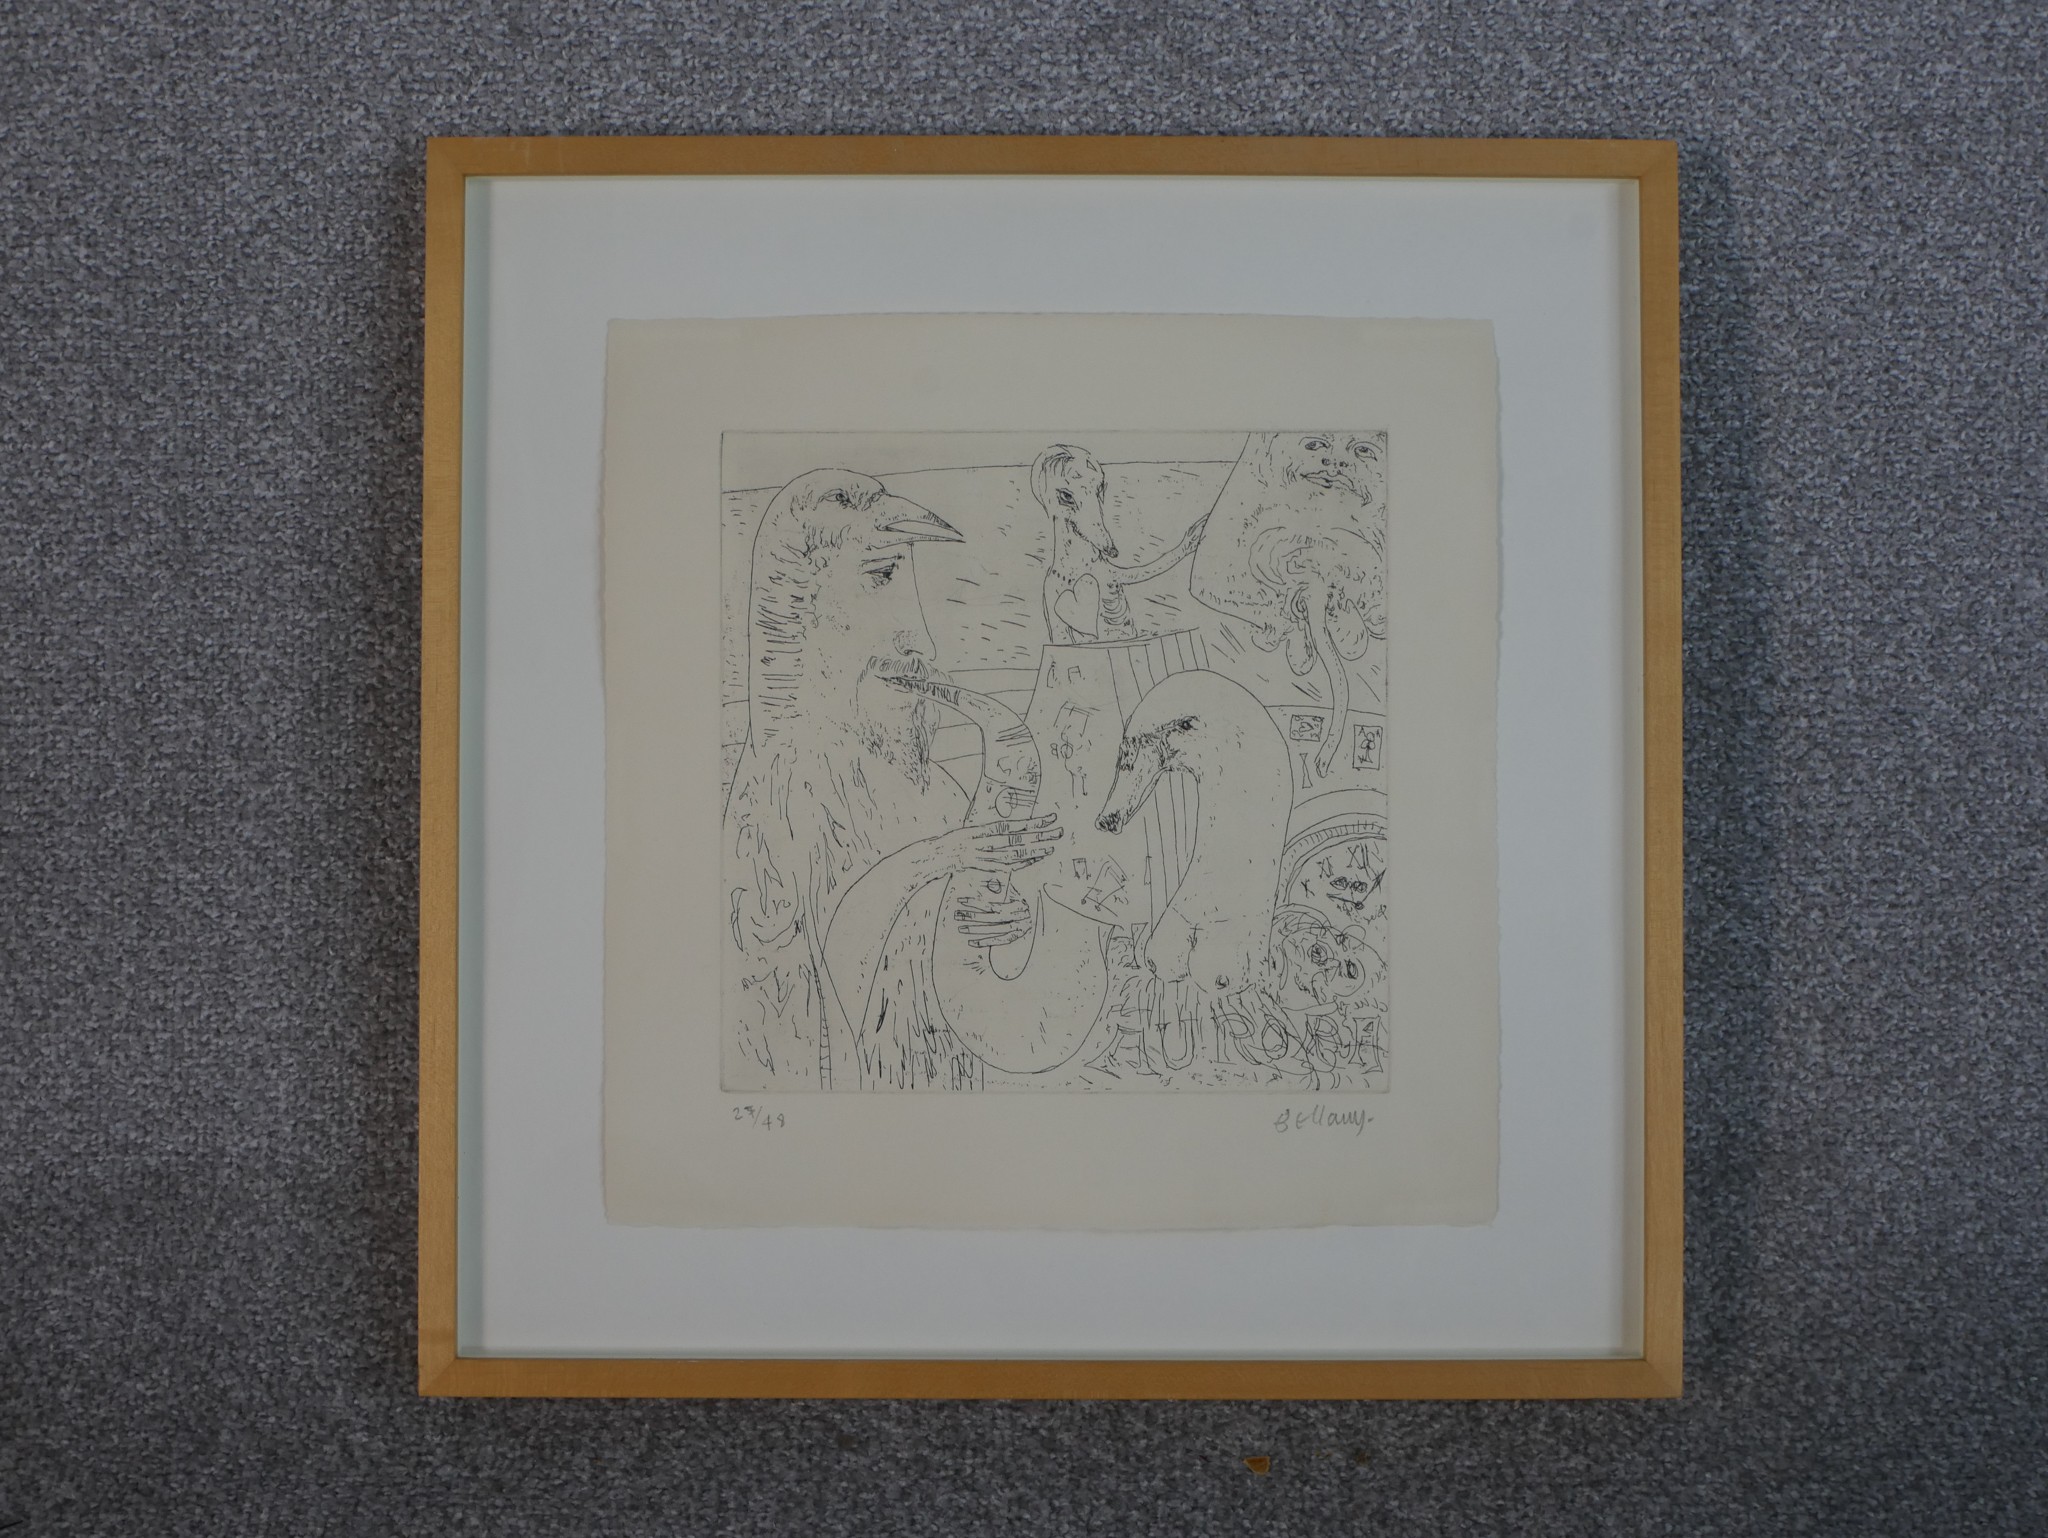 John Bellany (1942-2013), Serendipity, limited edition etching 27/48, signed and numbered in pencil, - Image 2 of 6